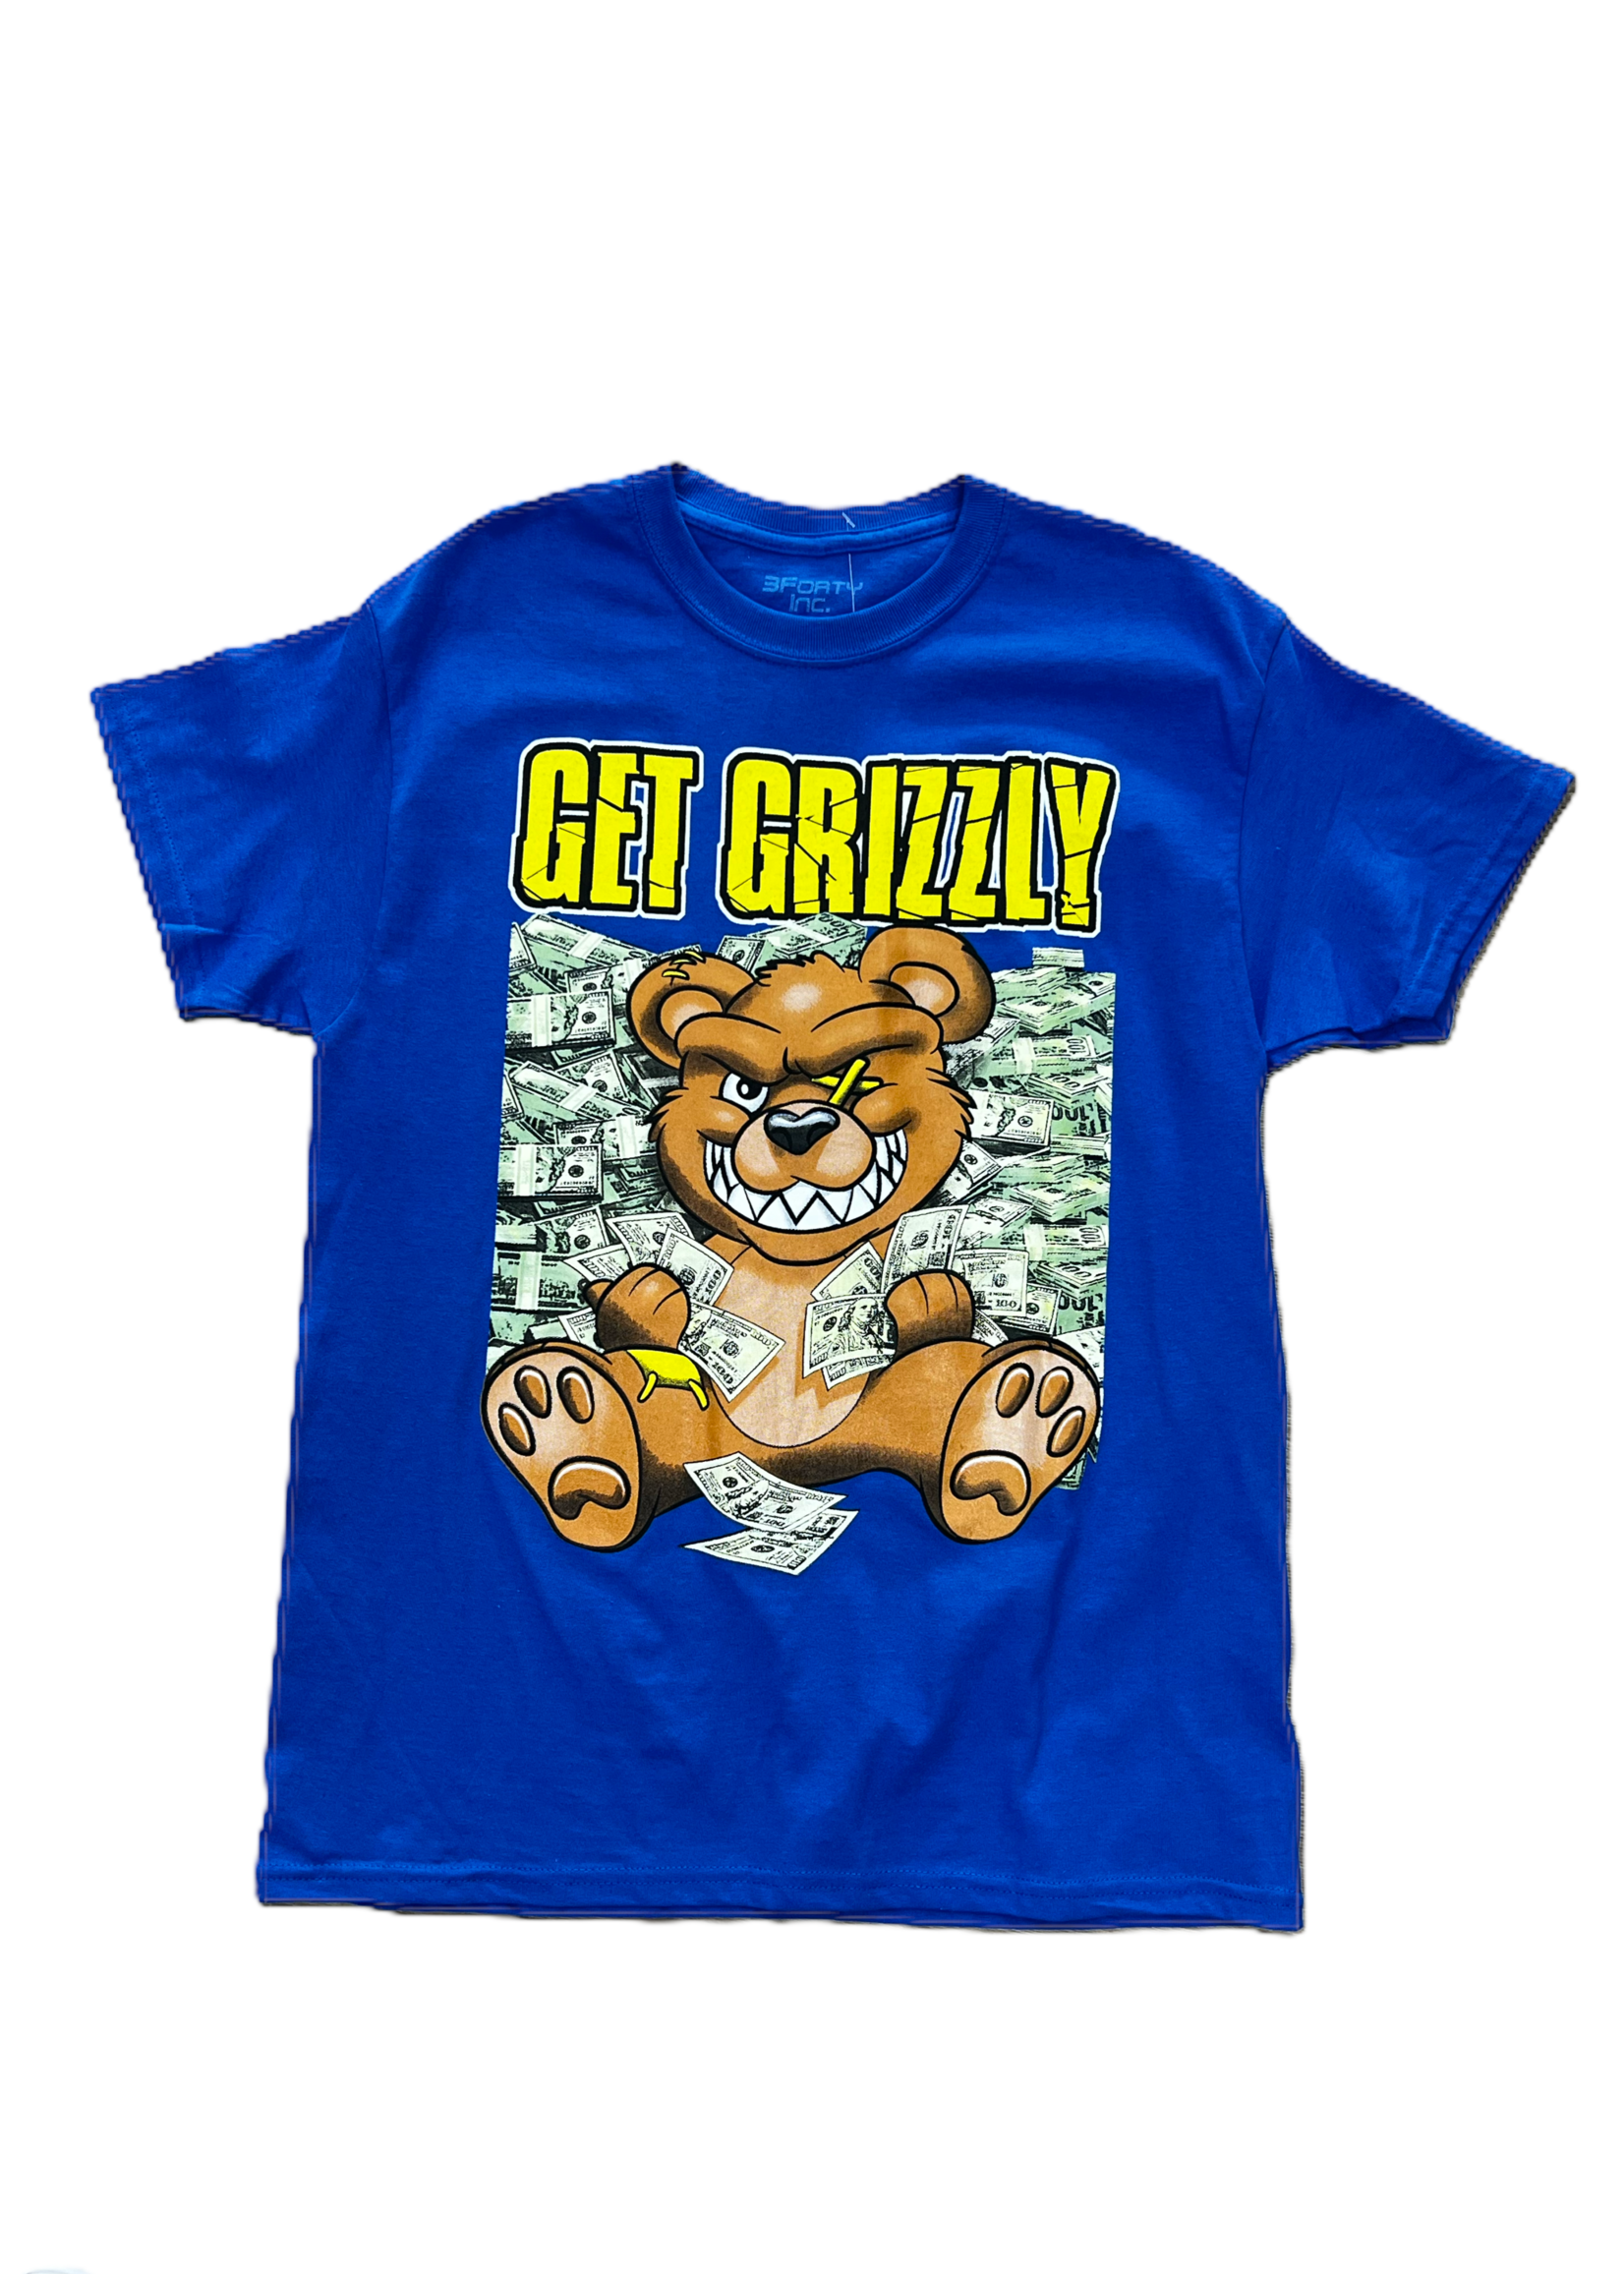 3FORTY GET GRIZZLY T-SHIRT - (Black/Royal)